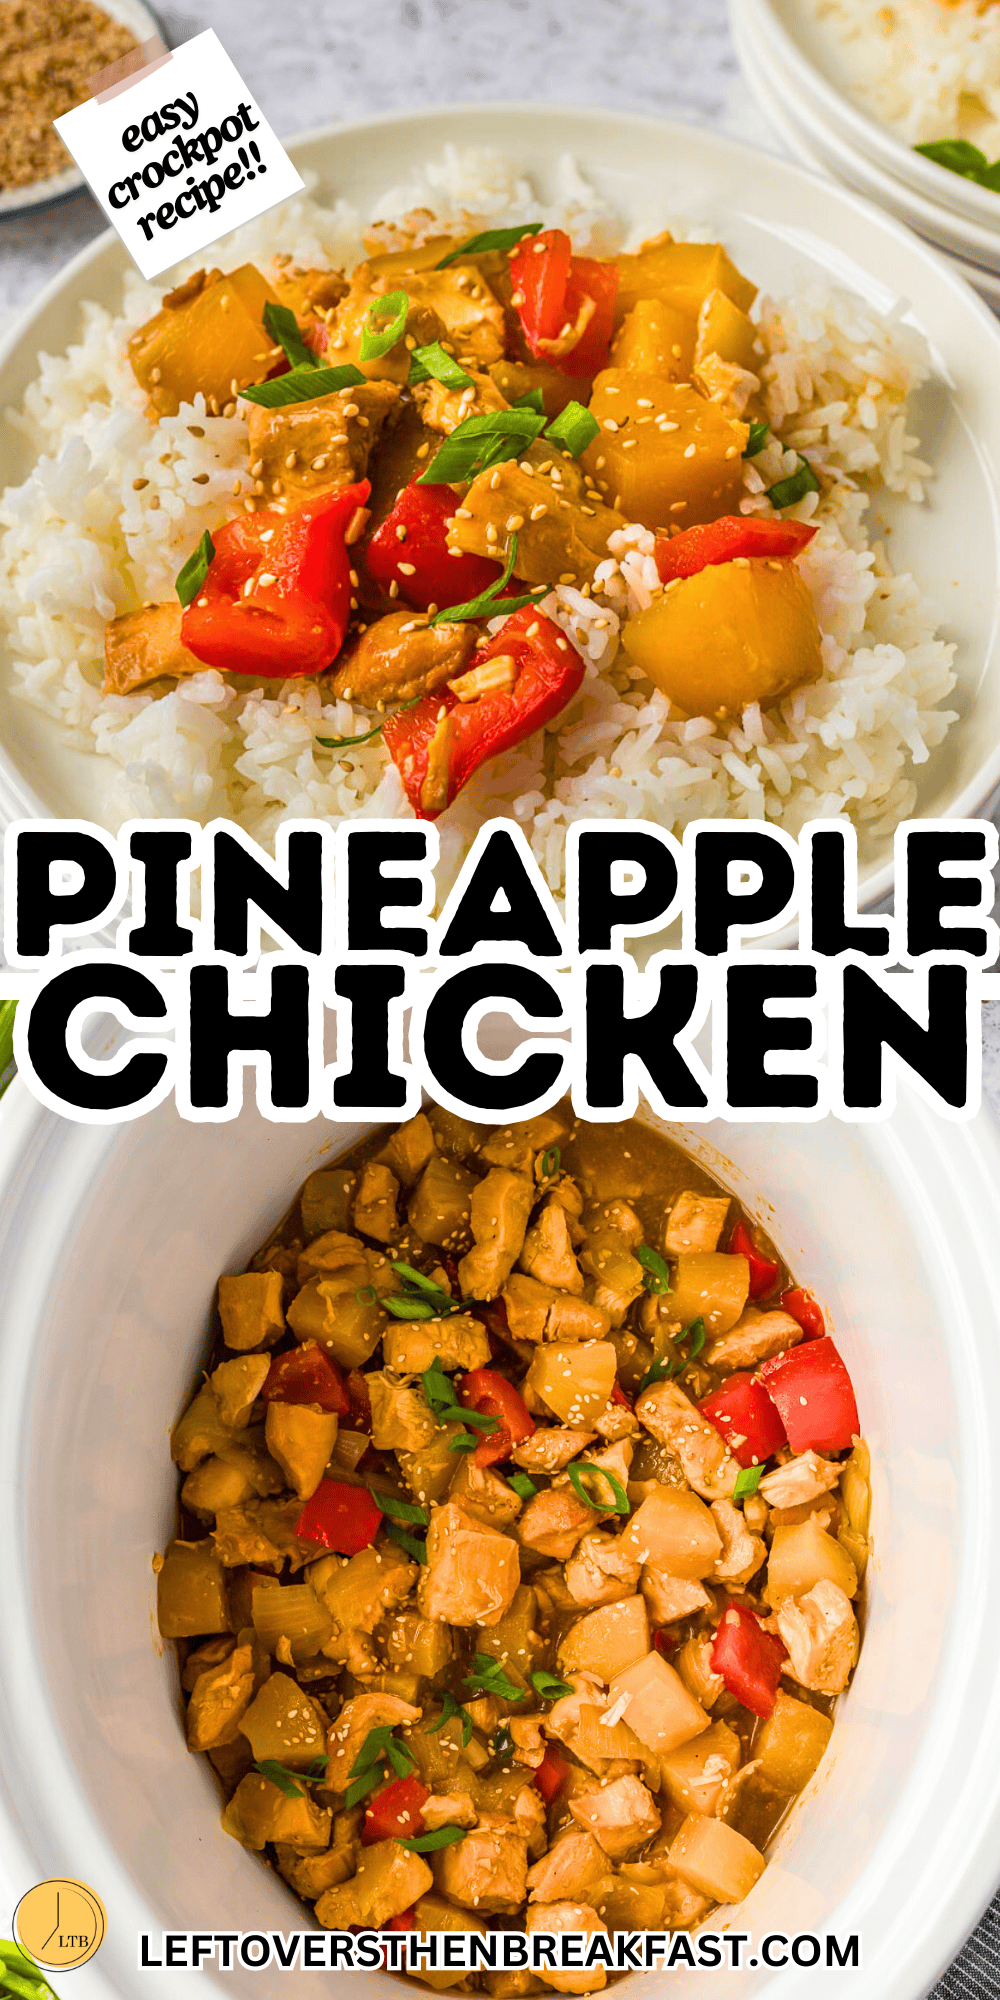 pineapple chicken made in a crockpot